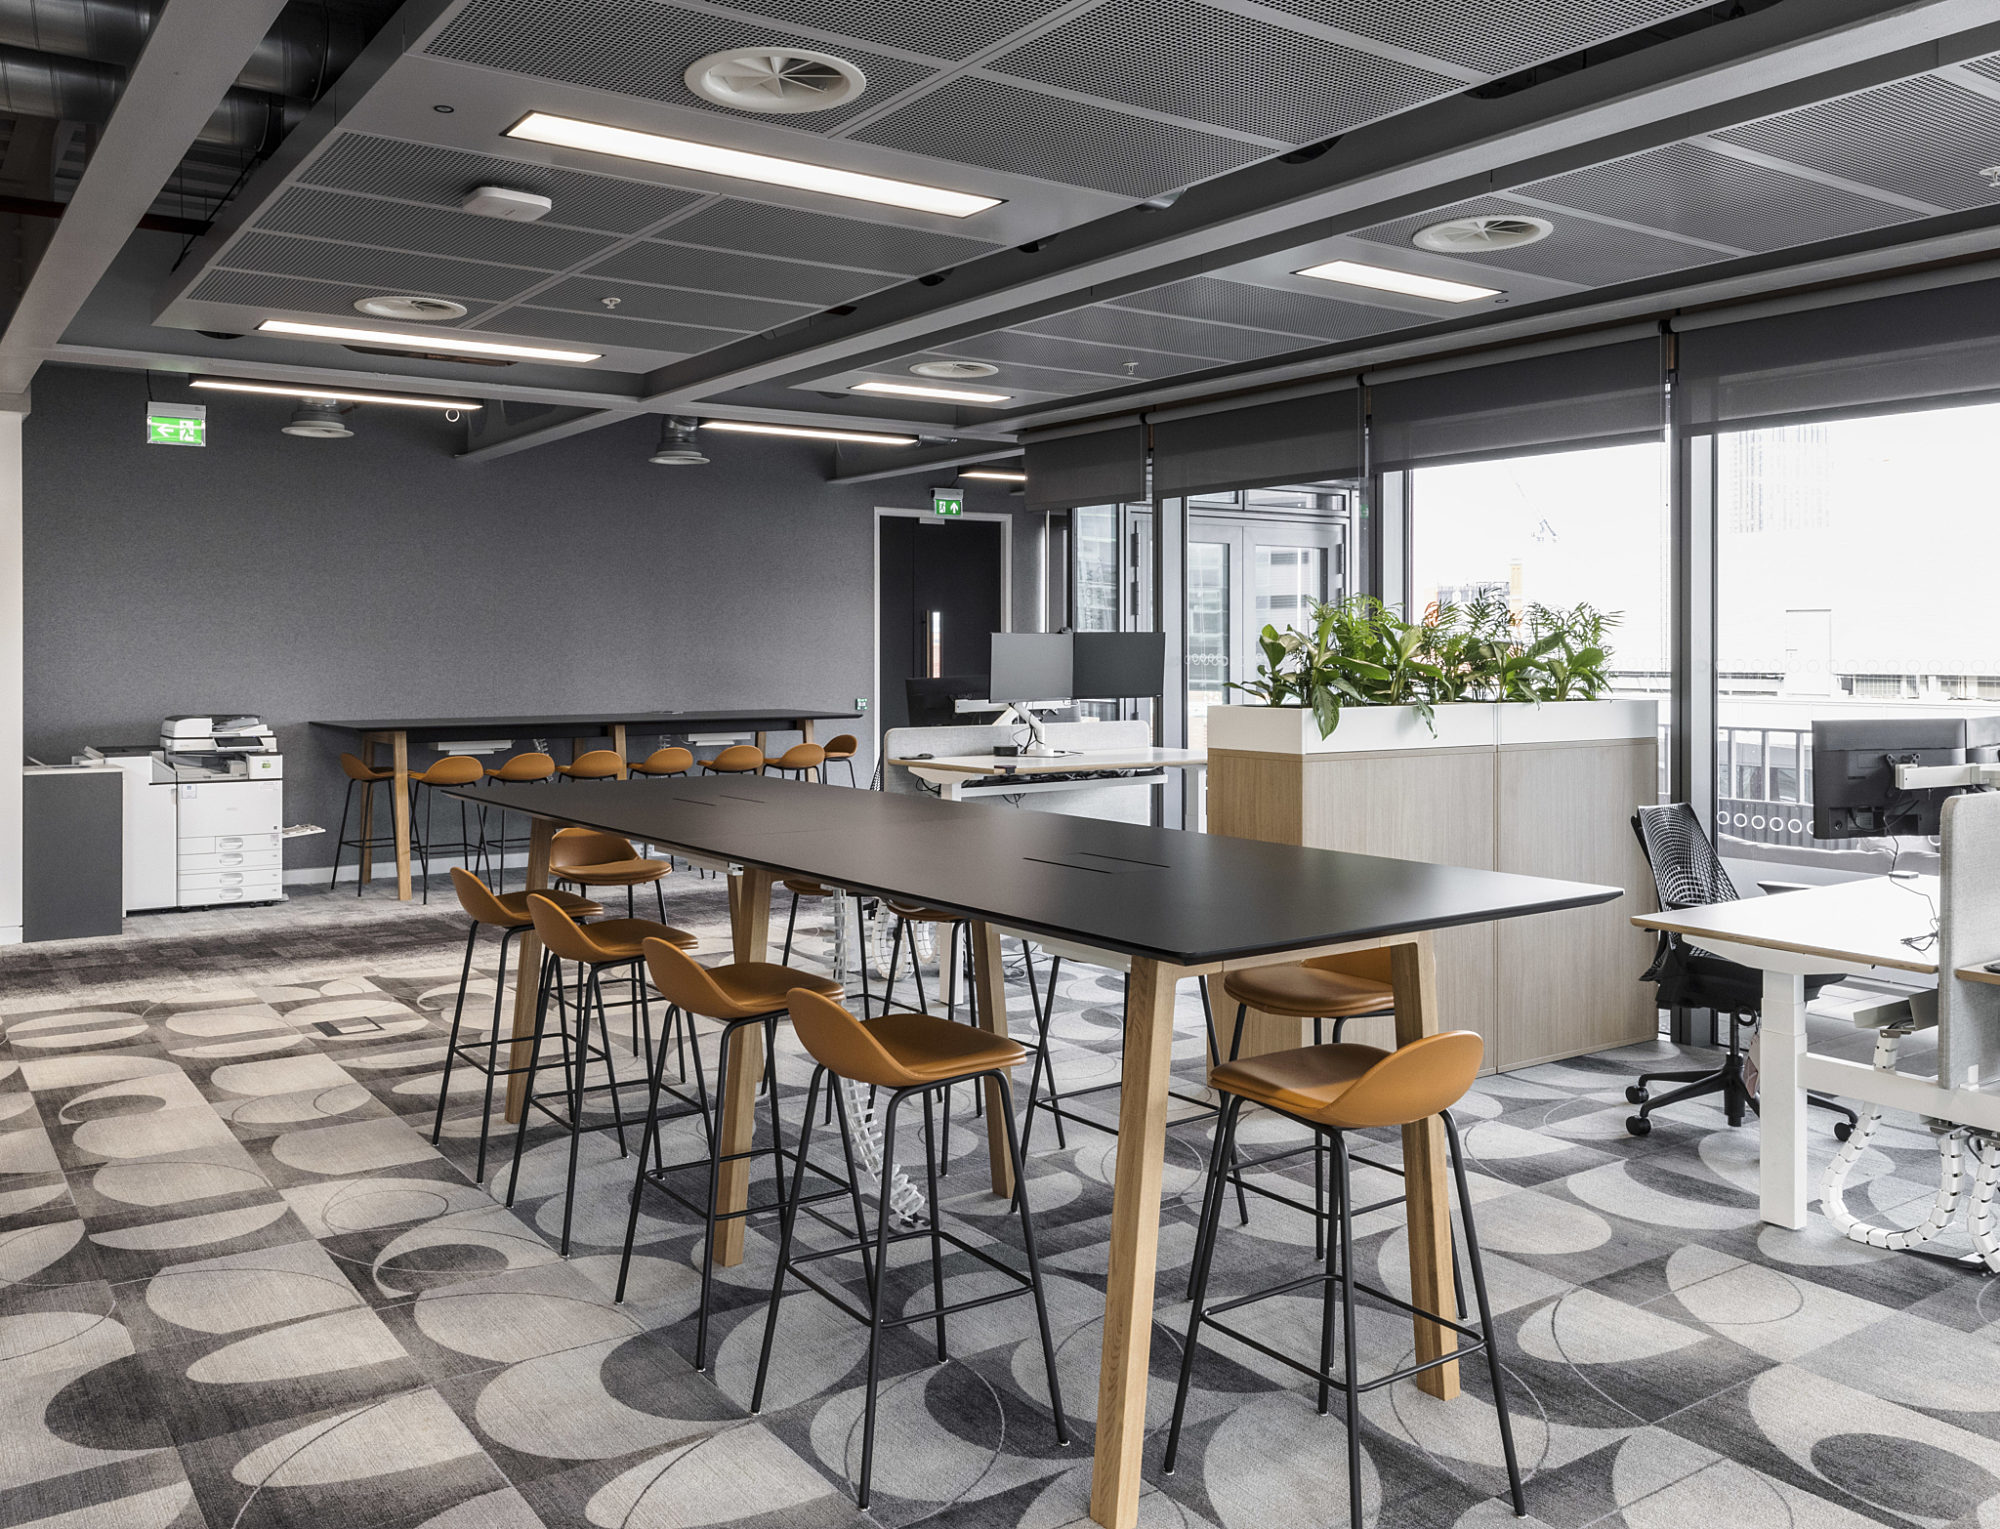 Interior fit out for collaboration